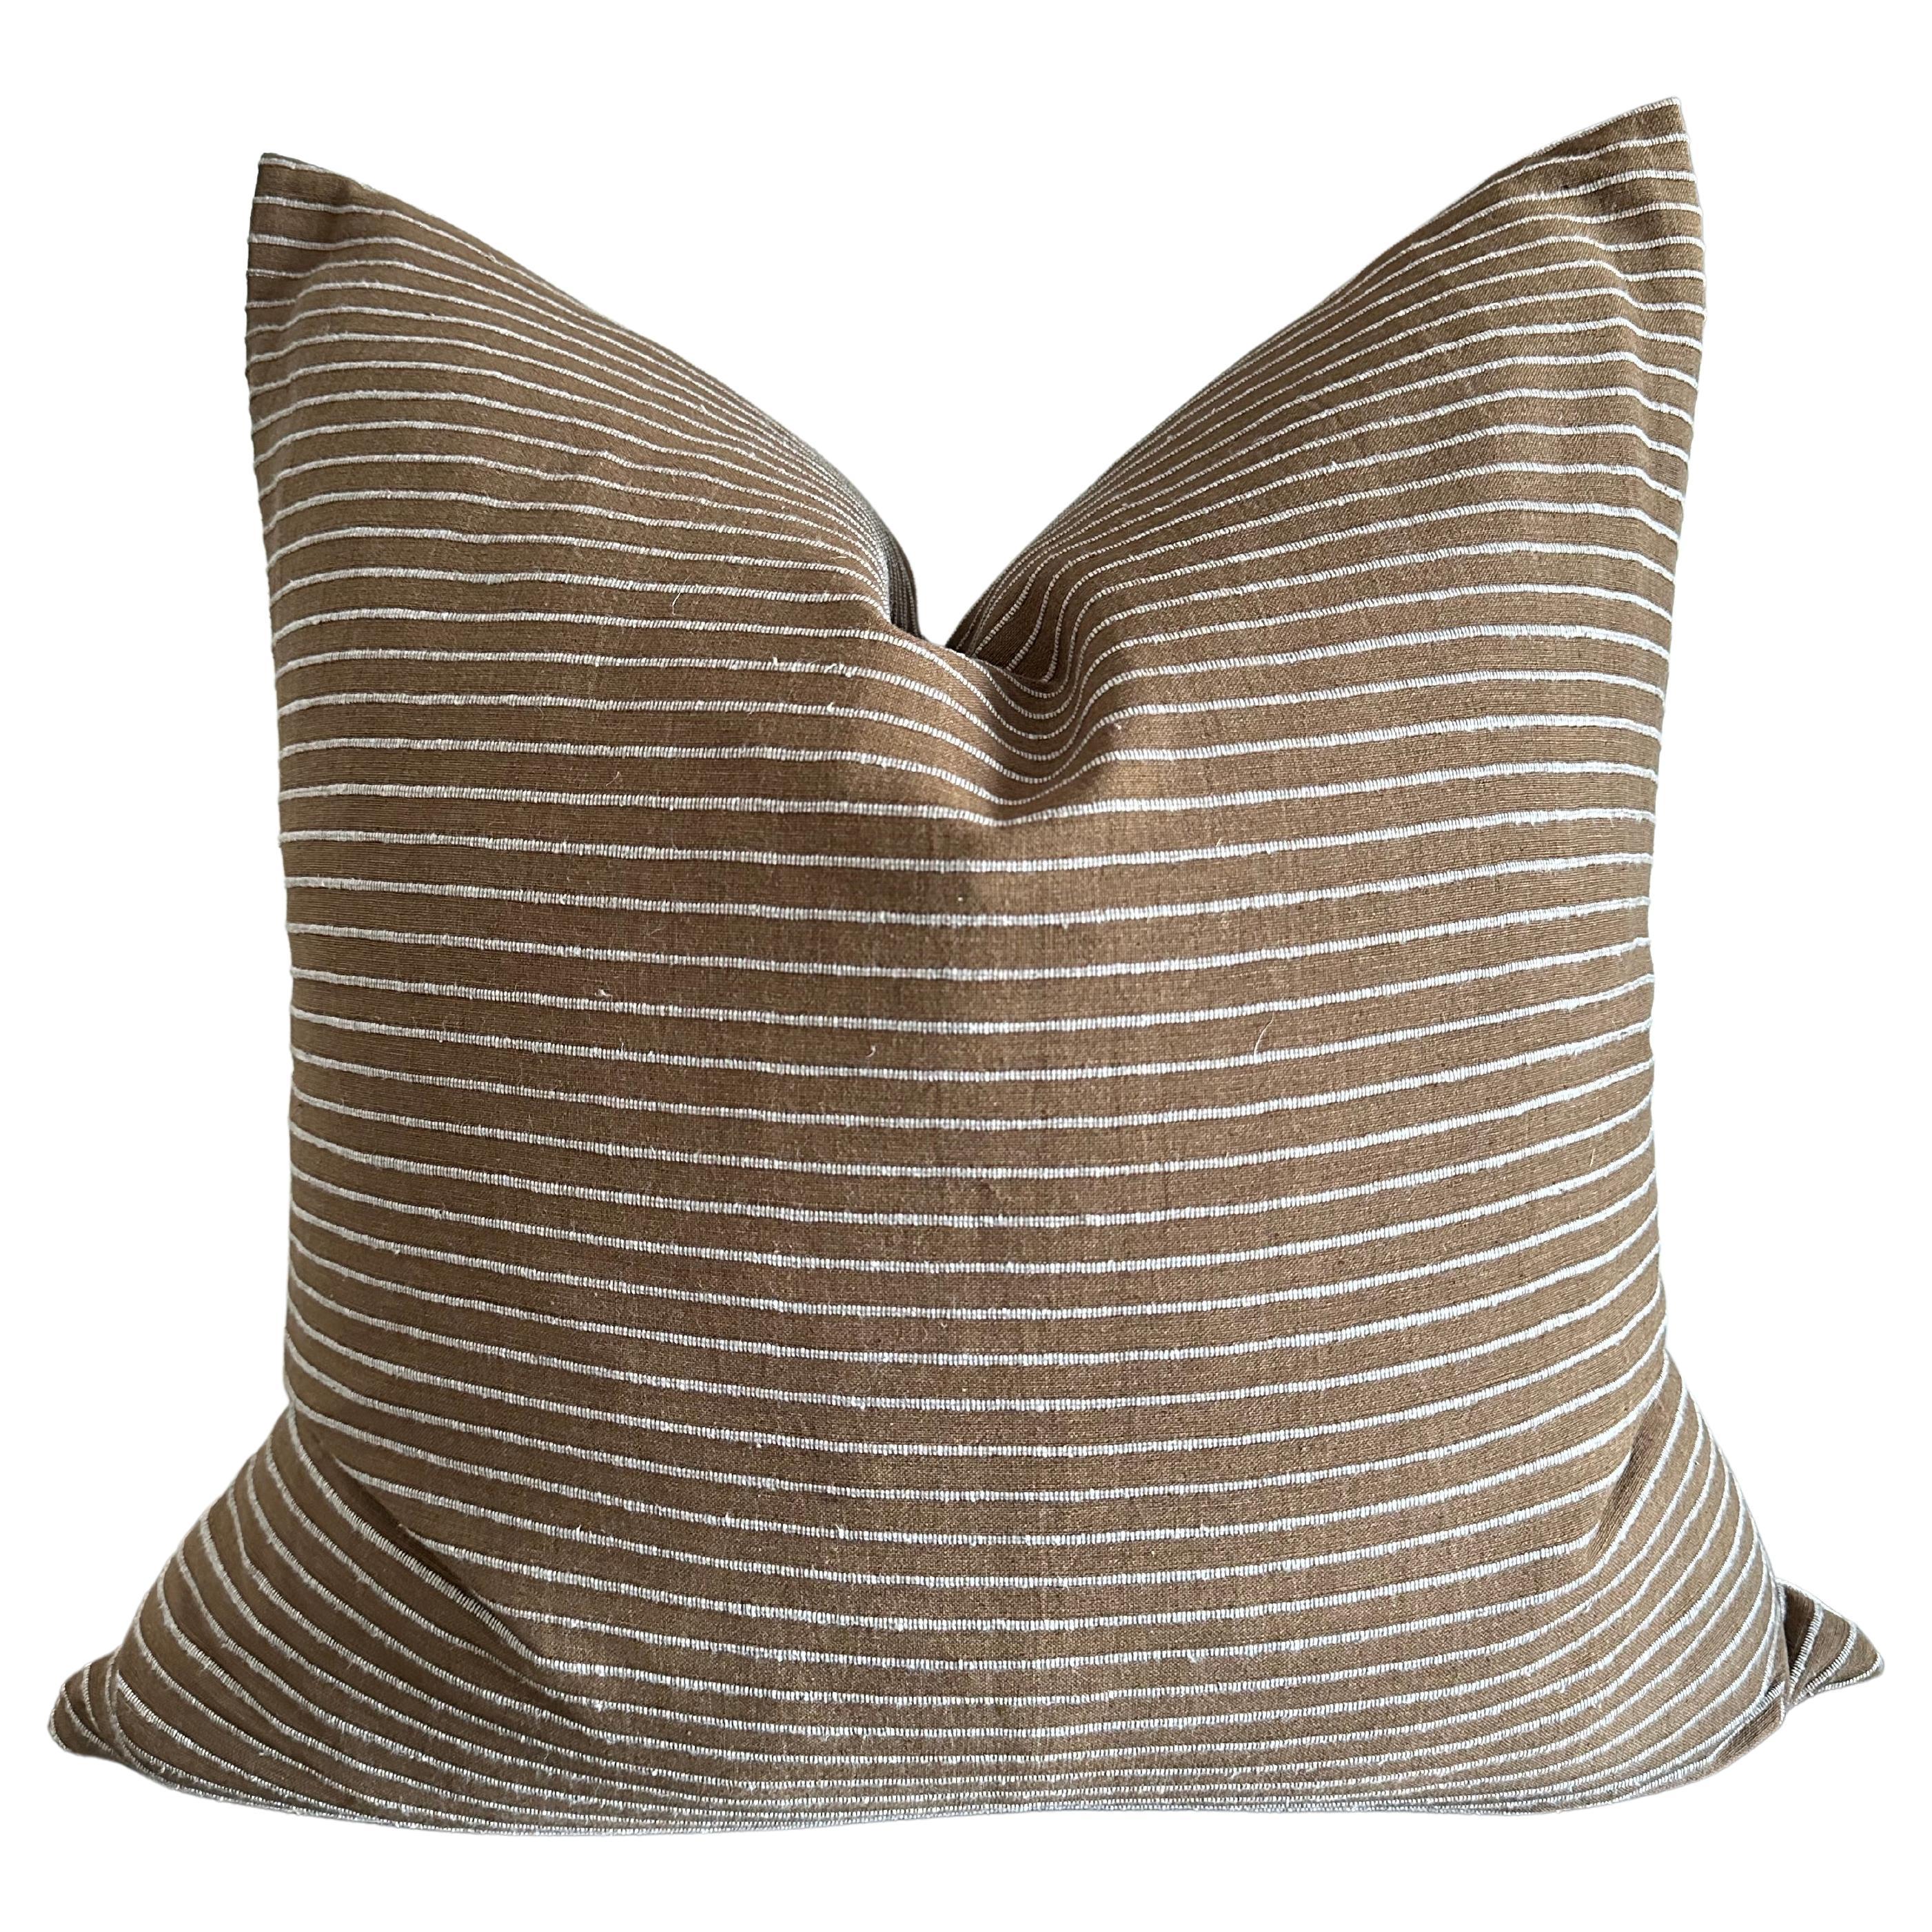 Whittier Brown and Cream Stripe Linen Pillow with Down Insert